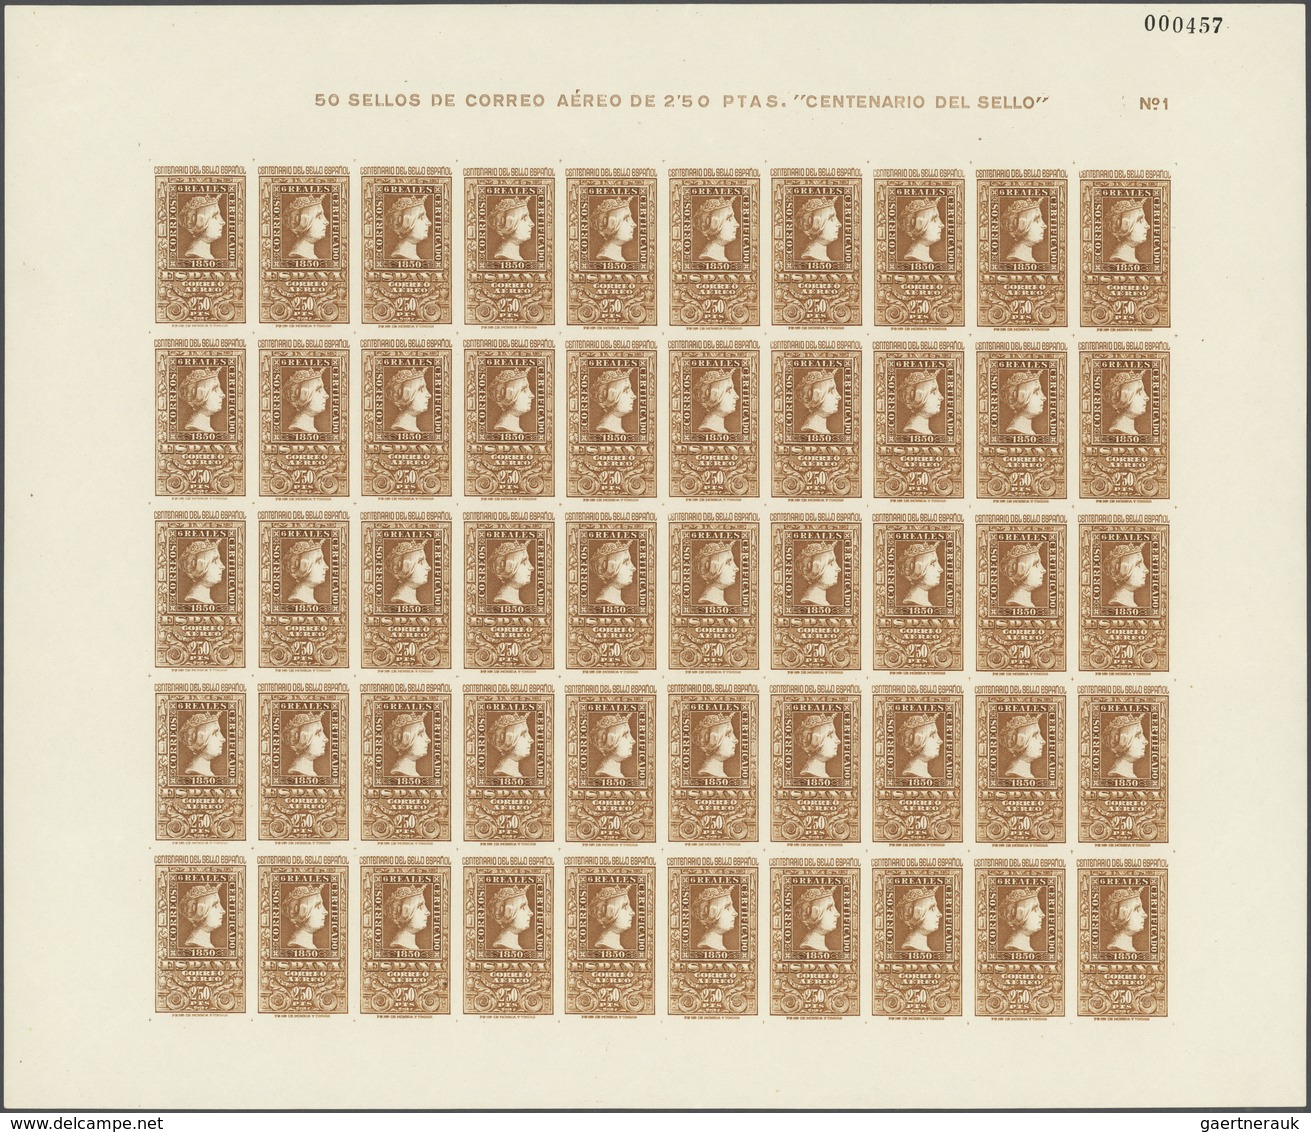 Spanien: 1950, Centenary of Spanish Stamps, complete set of eight values in sheets of 50 stamps, min